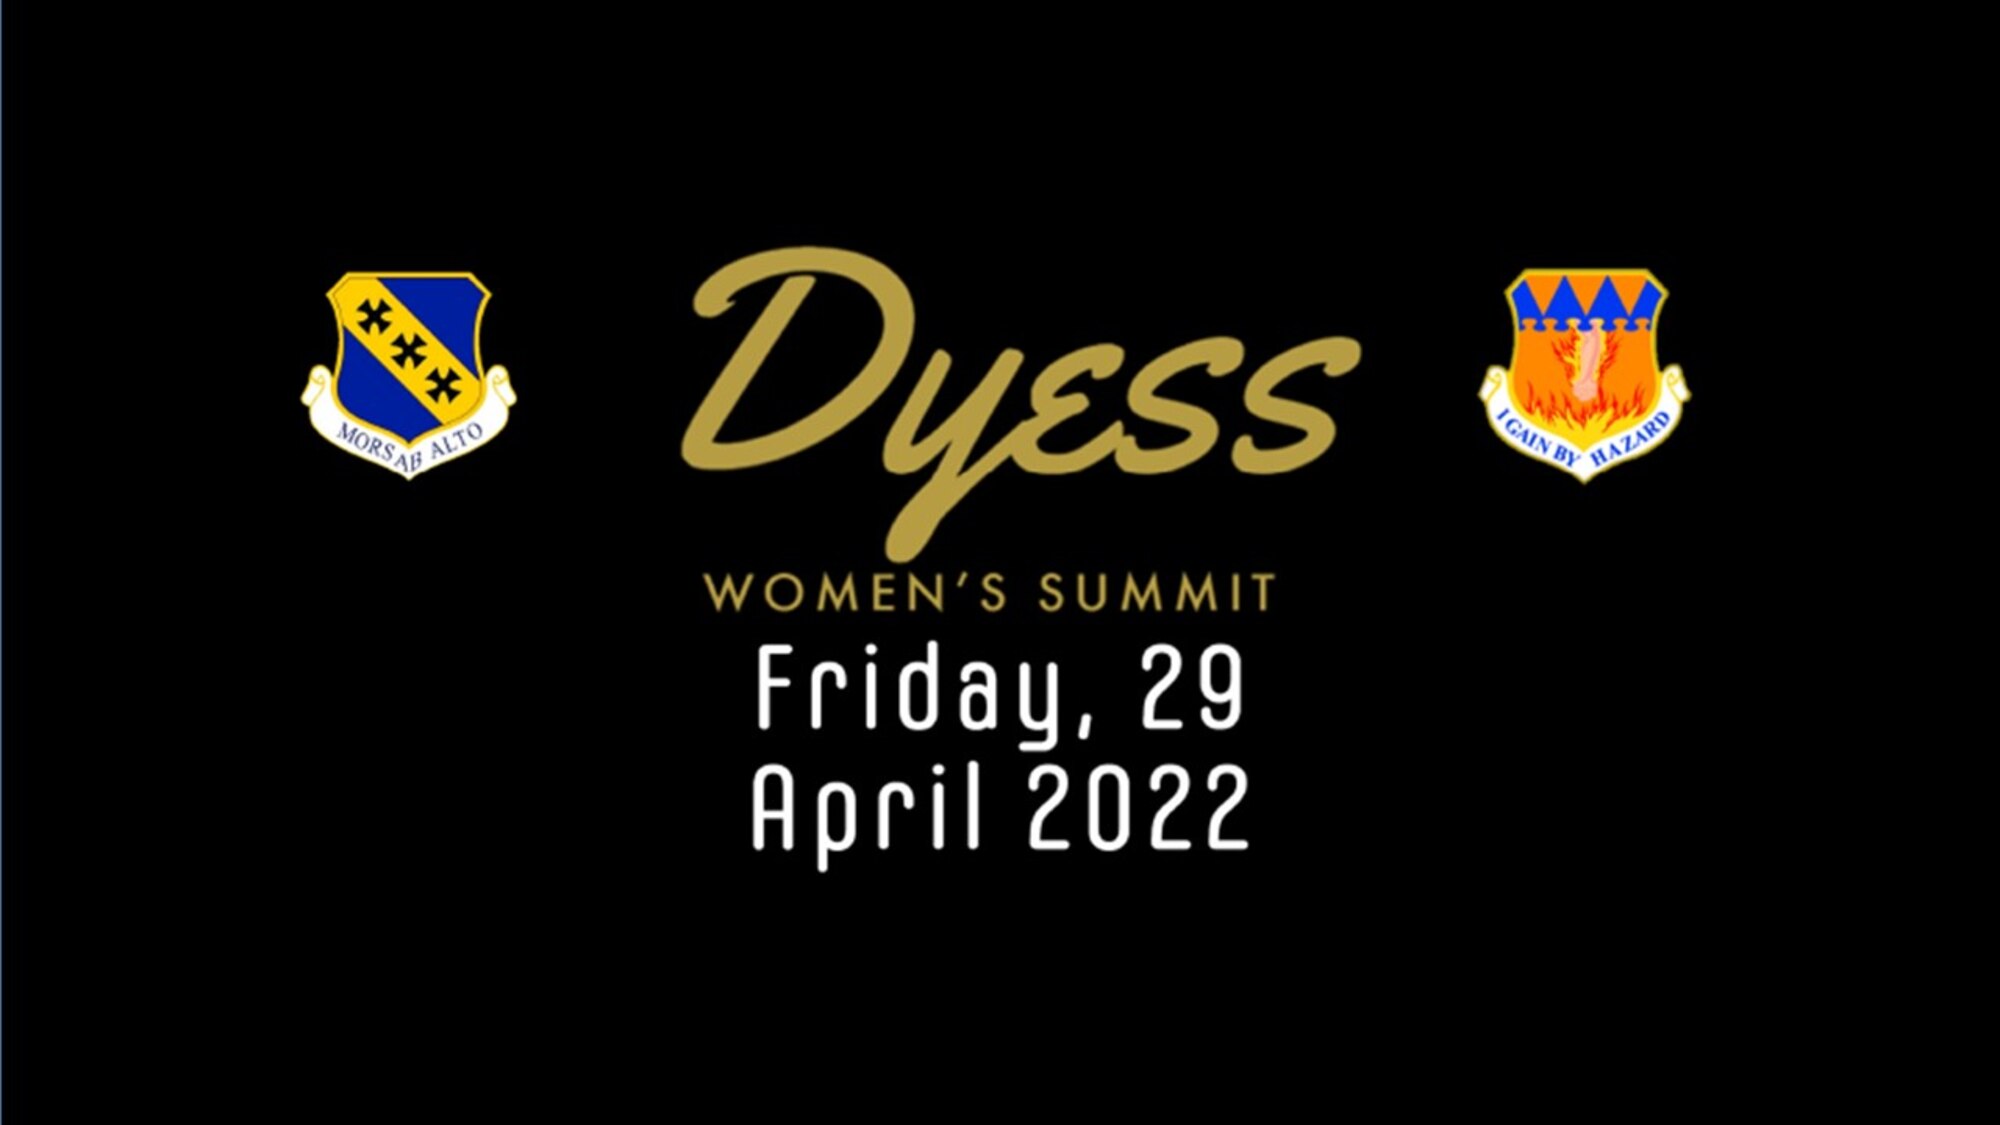 Dyess AFB will host the Dyess Women’s Summit open house for anyone with base access, April 29, 2022.